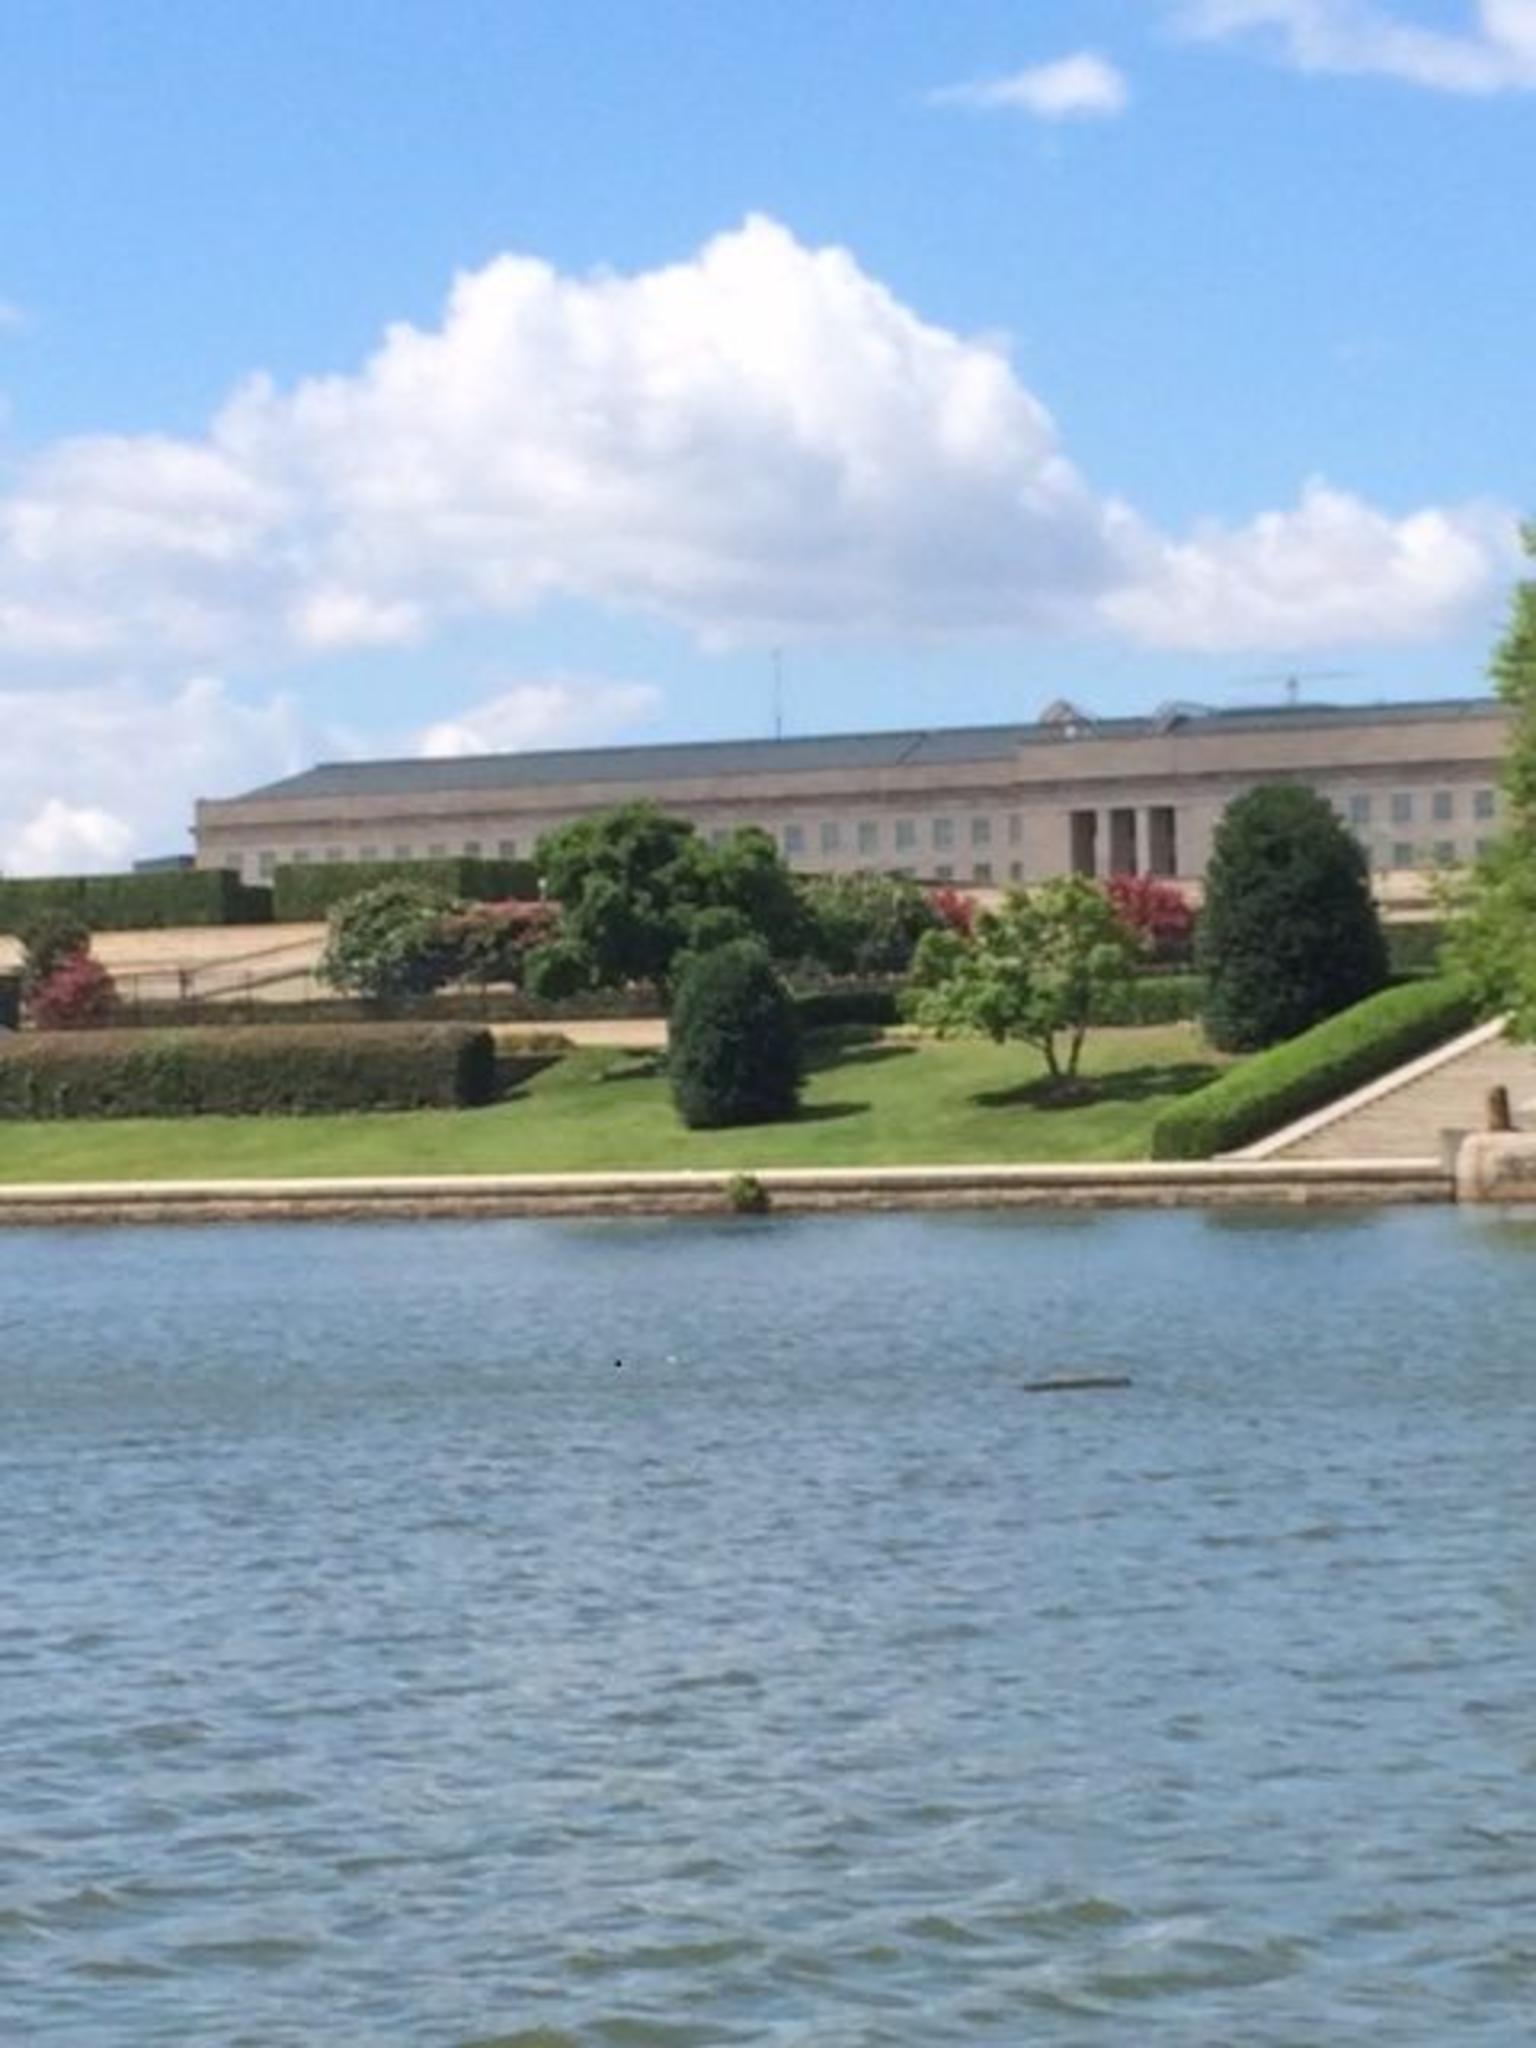 Pentagon from the Potomac River